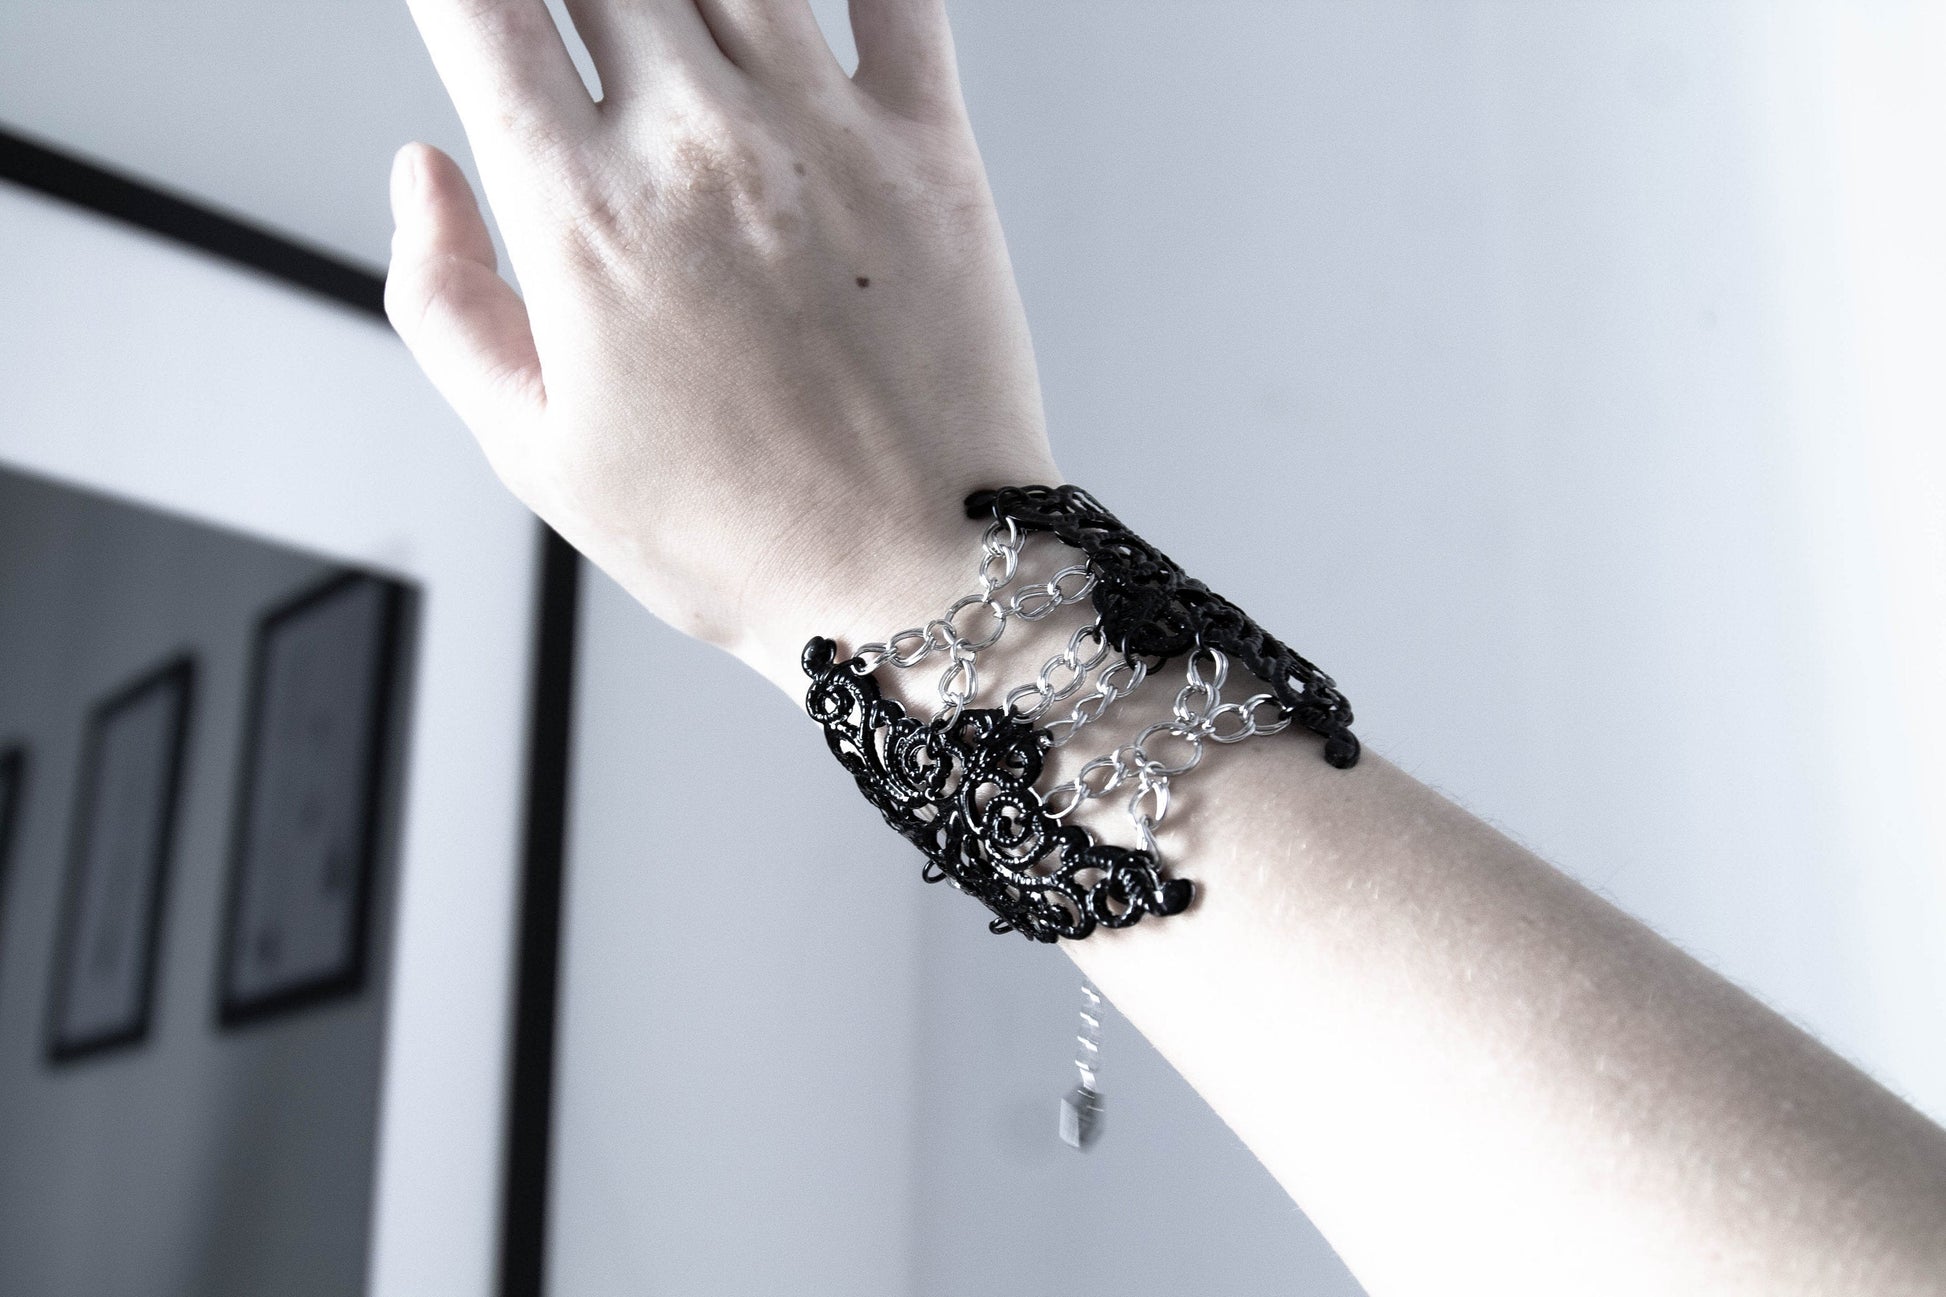 A model’s wrist is adorned with a Myril Jewels gothic bracelet featuring intricate, dark filigree that interlaces to form a lavish, ornamental design. This piece embodies the spirit of neo-gothic jewelry, a bold accessory suited for Witchcore enthusiasts, and a striking gift for those with a penchant for gothic-chic or festival fashion.